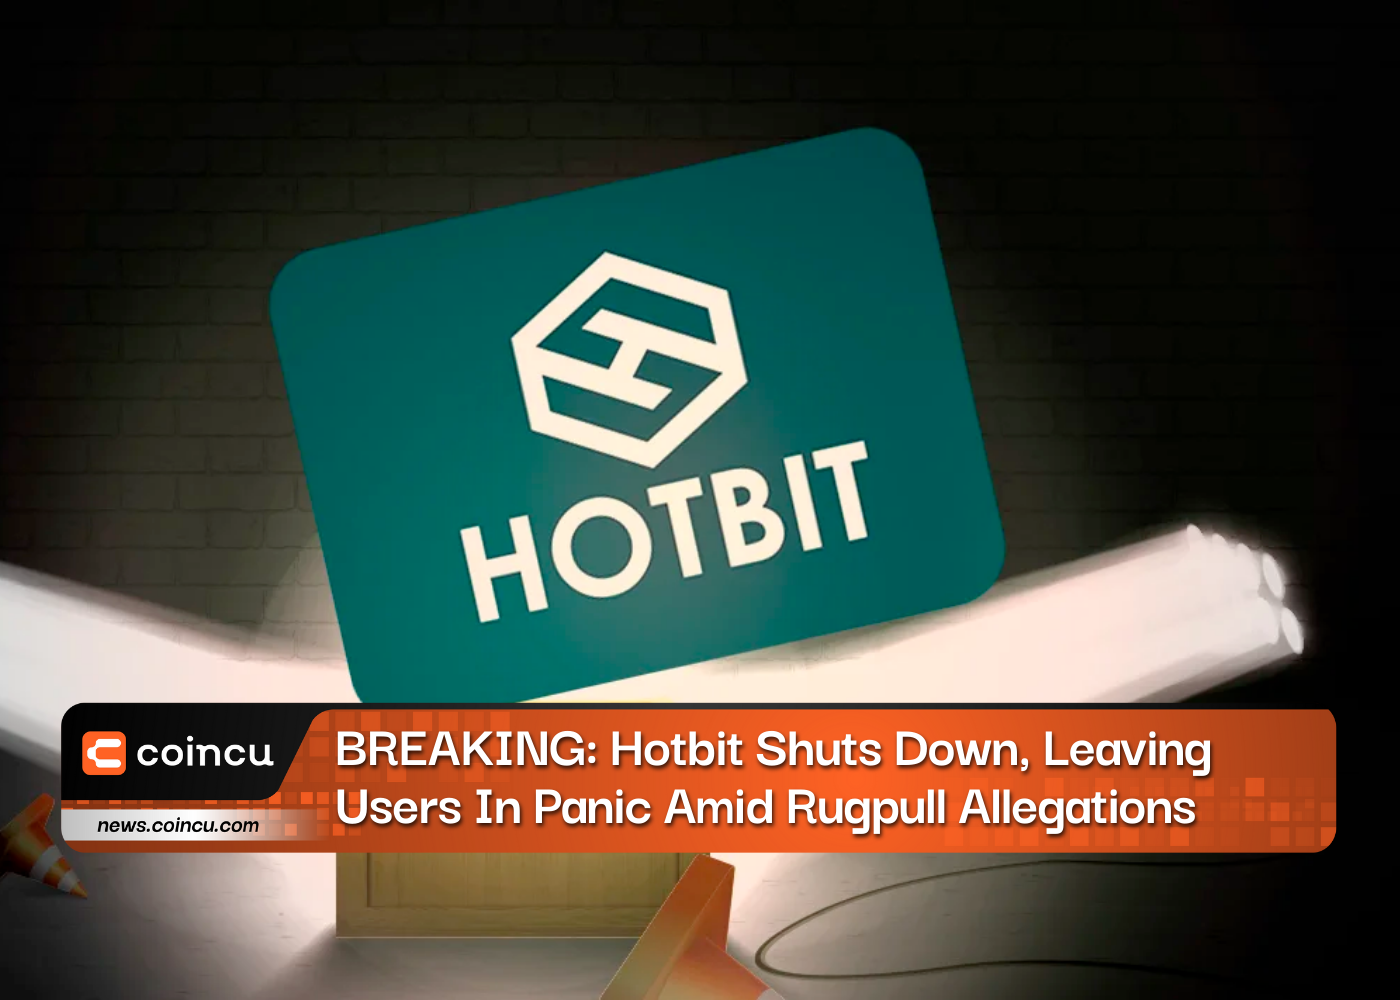 BREAKING: Hotbit Shuts Down, Leaving Users In Panic Amid Rugpull Allegations